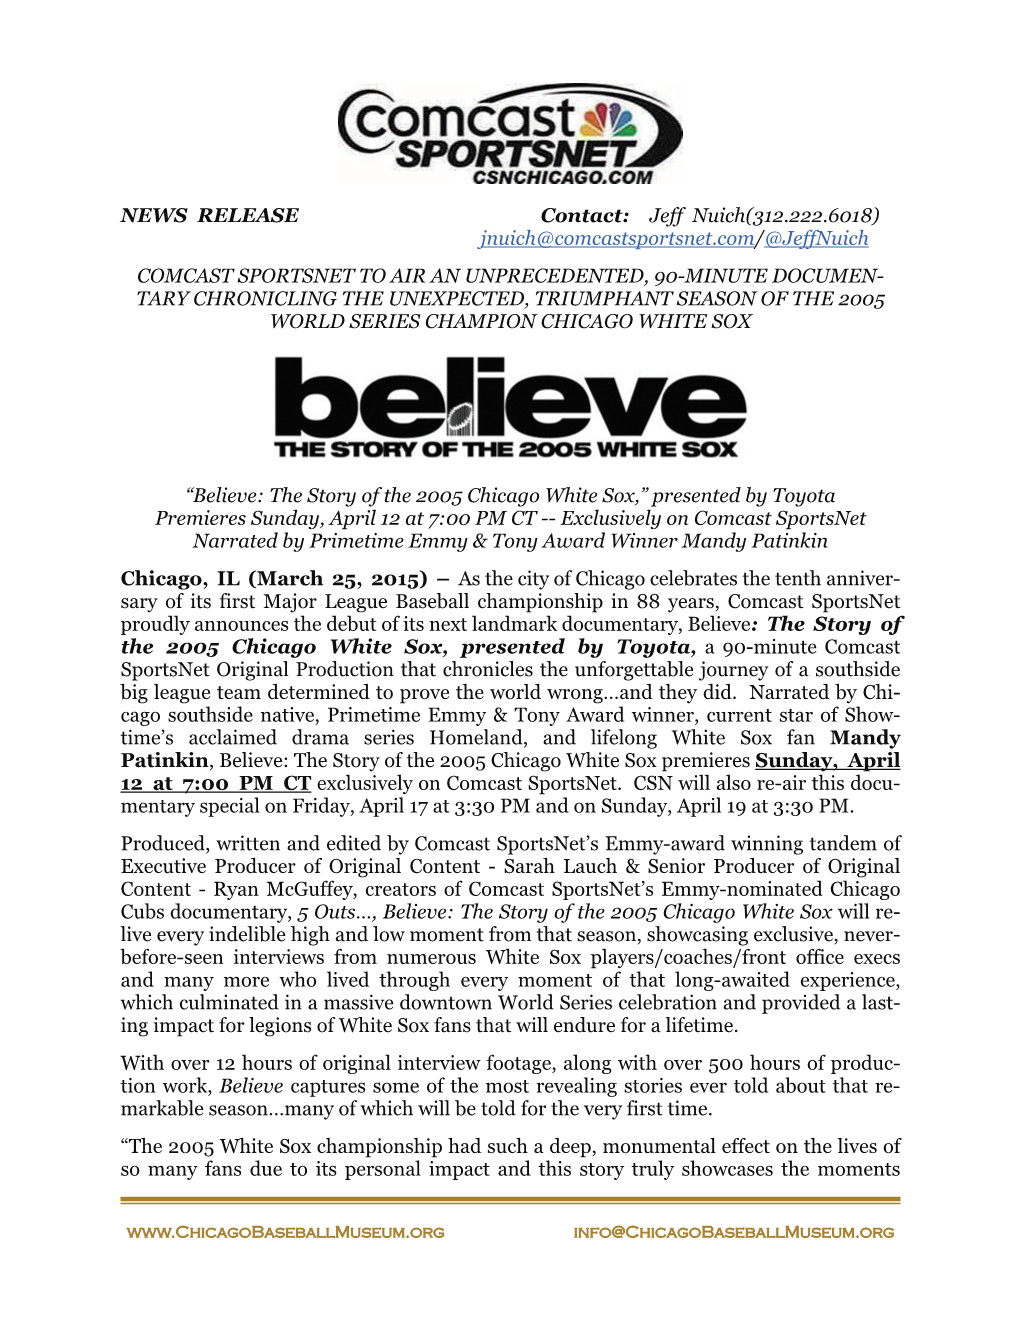 Believe: the Story of the 2005 Chicago White